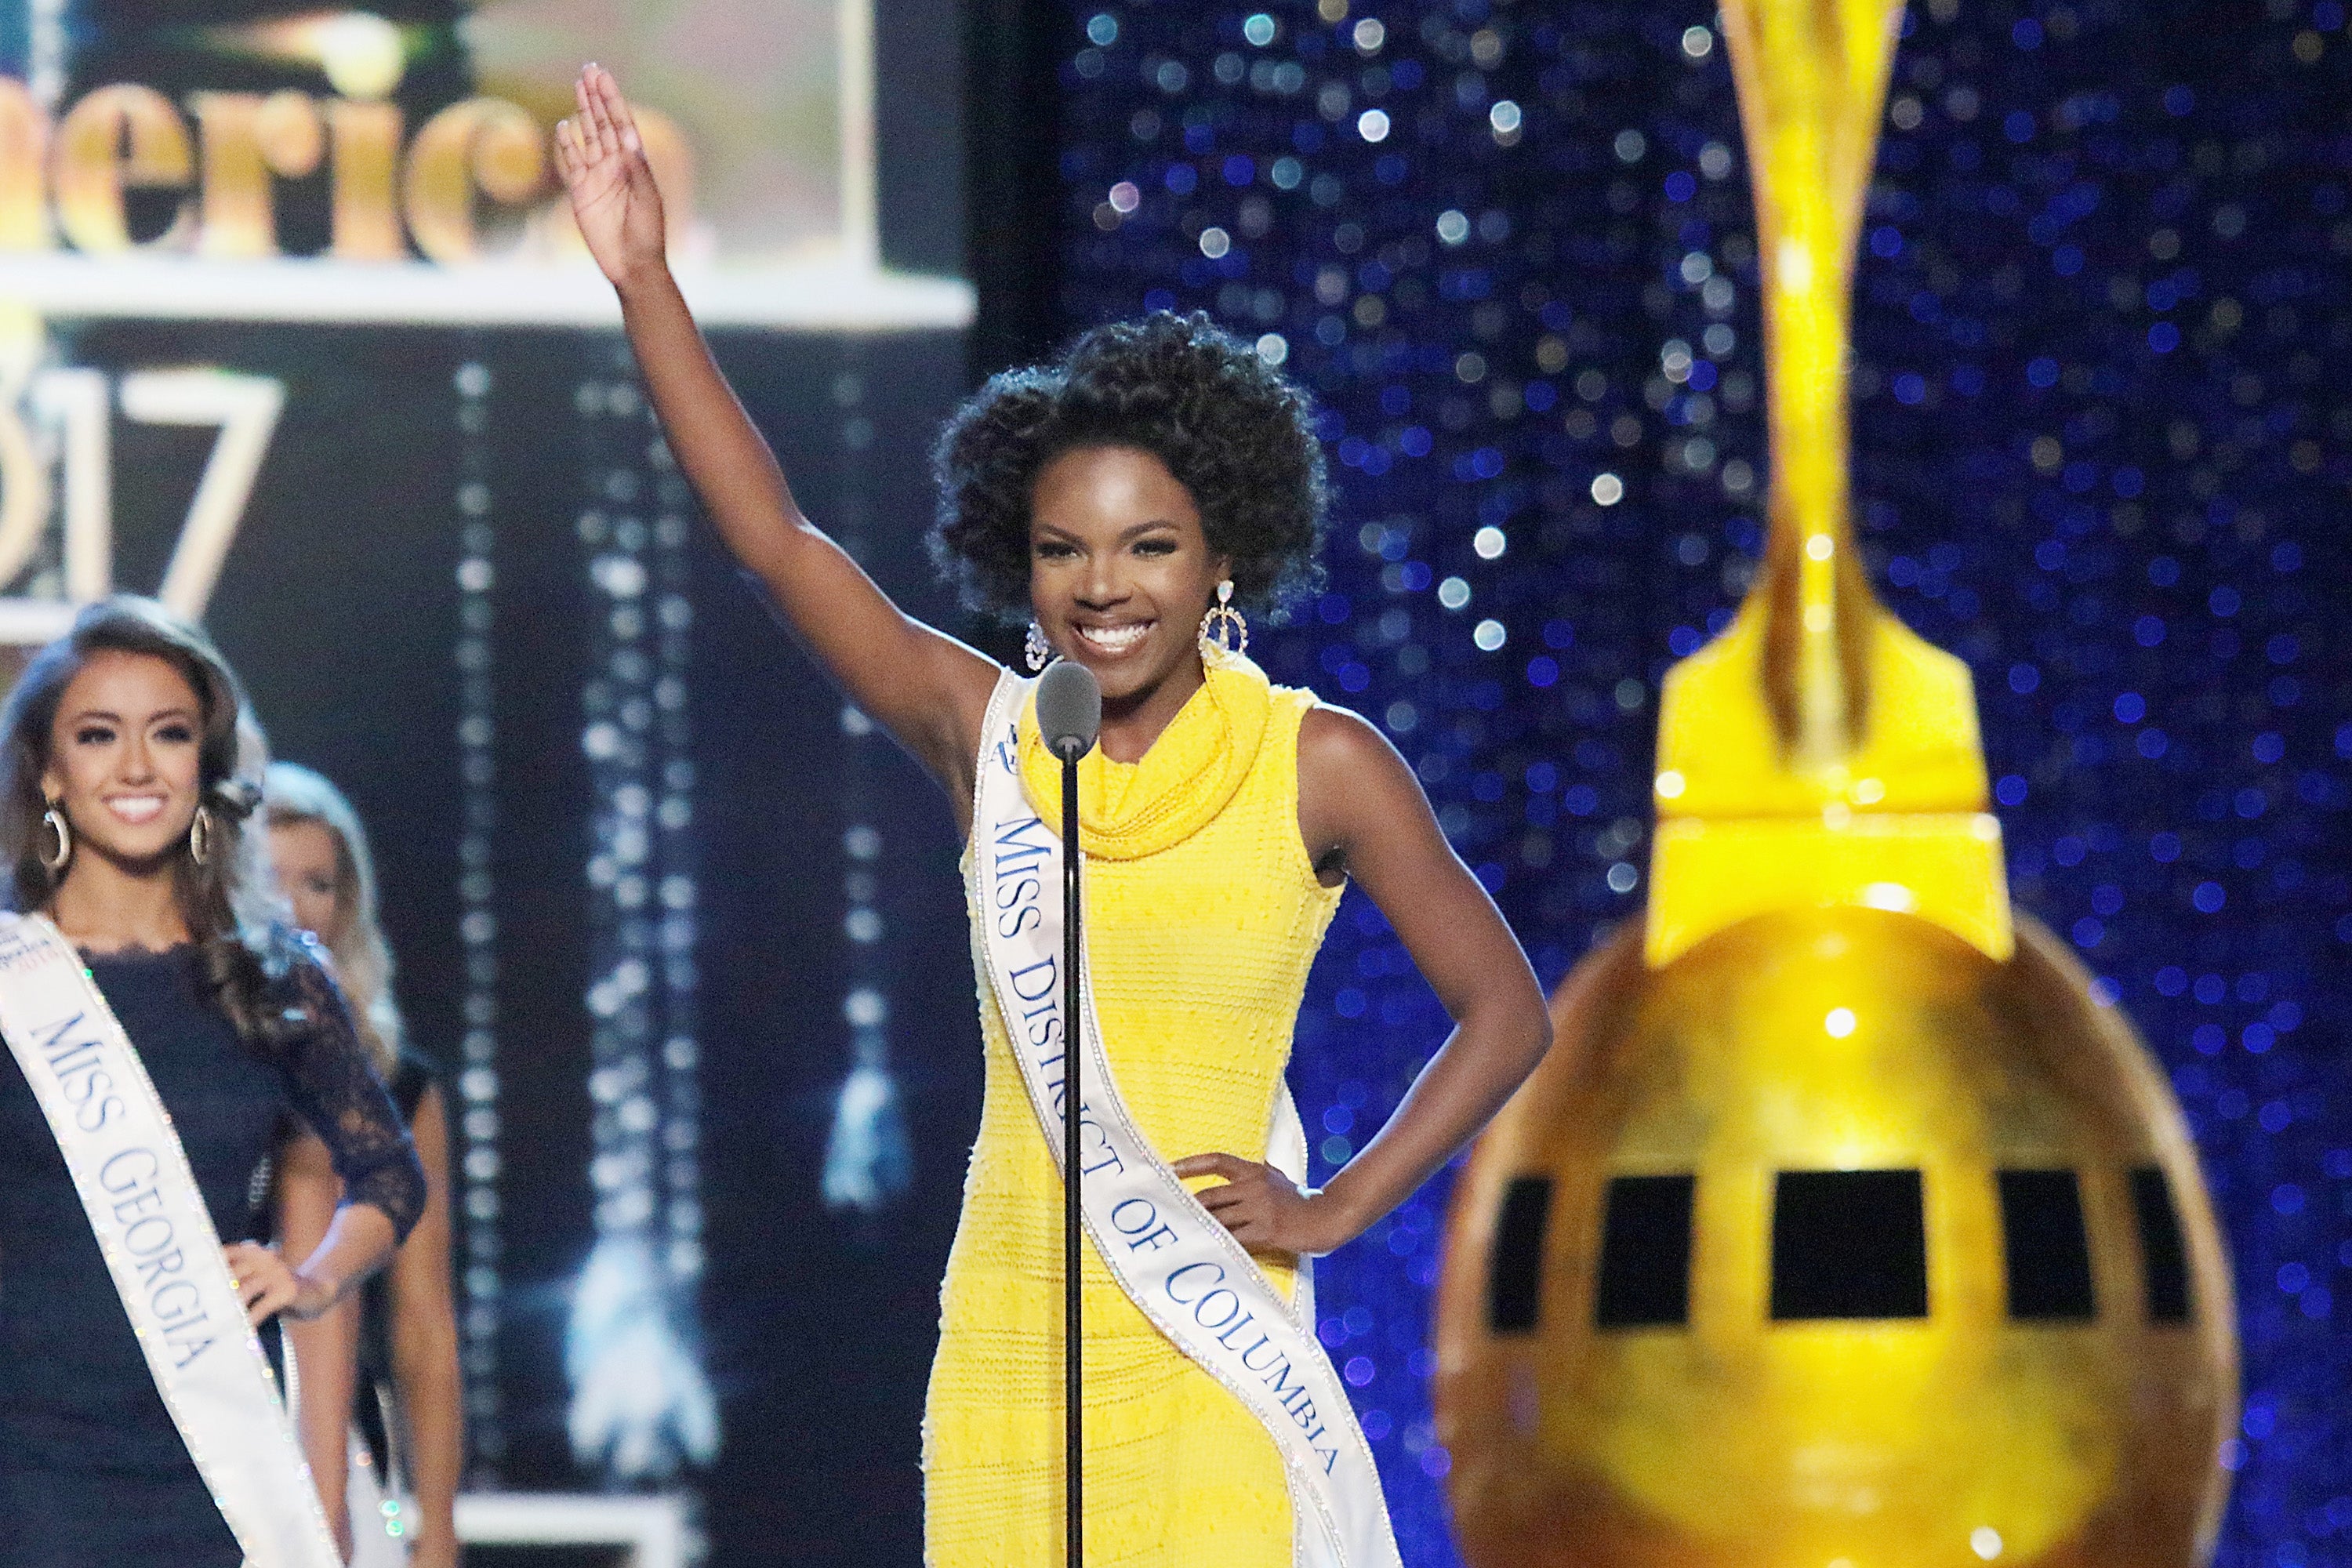 Miss D.C. Brings PTSD Platform to Miss America Pageant After Seeing How War Affected Her Family
